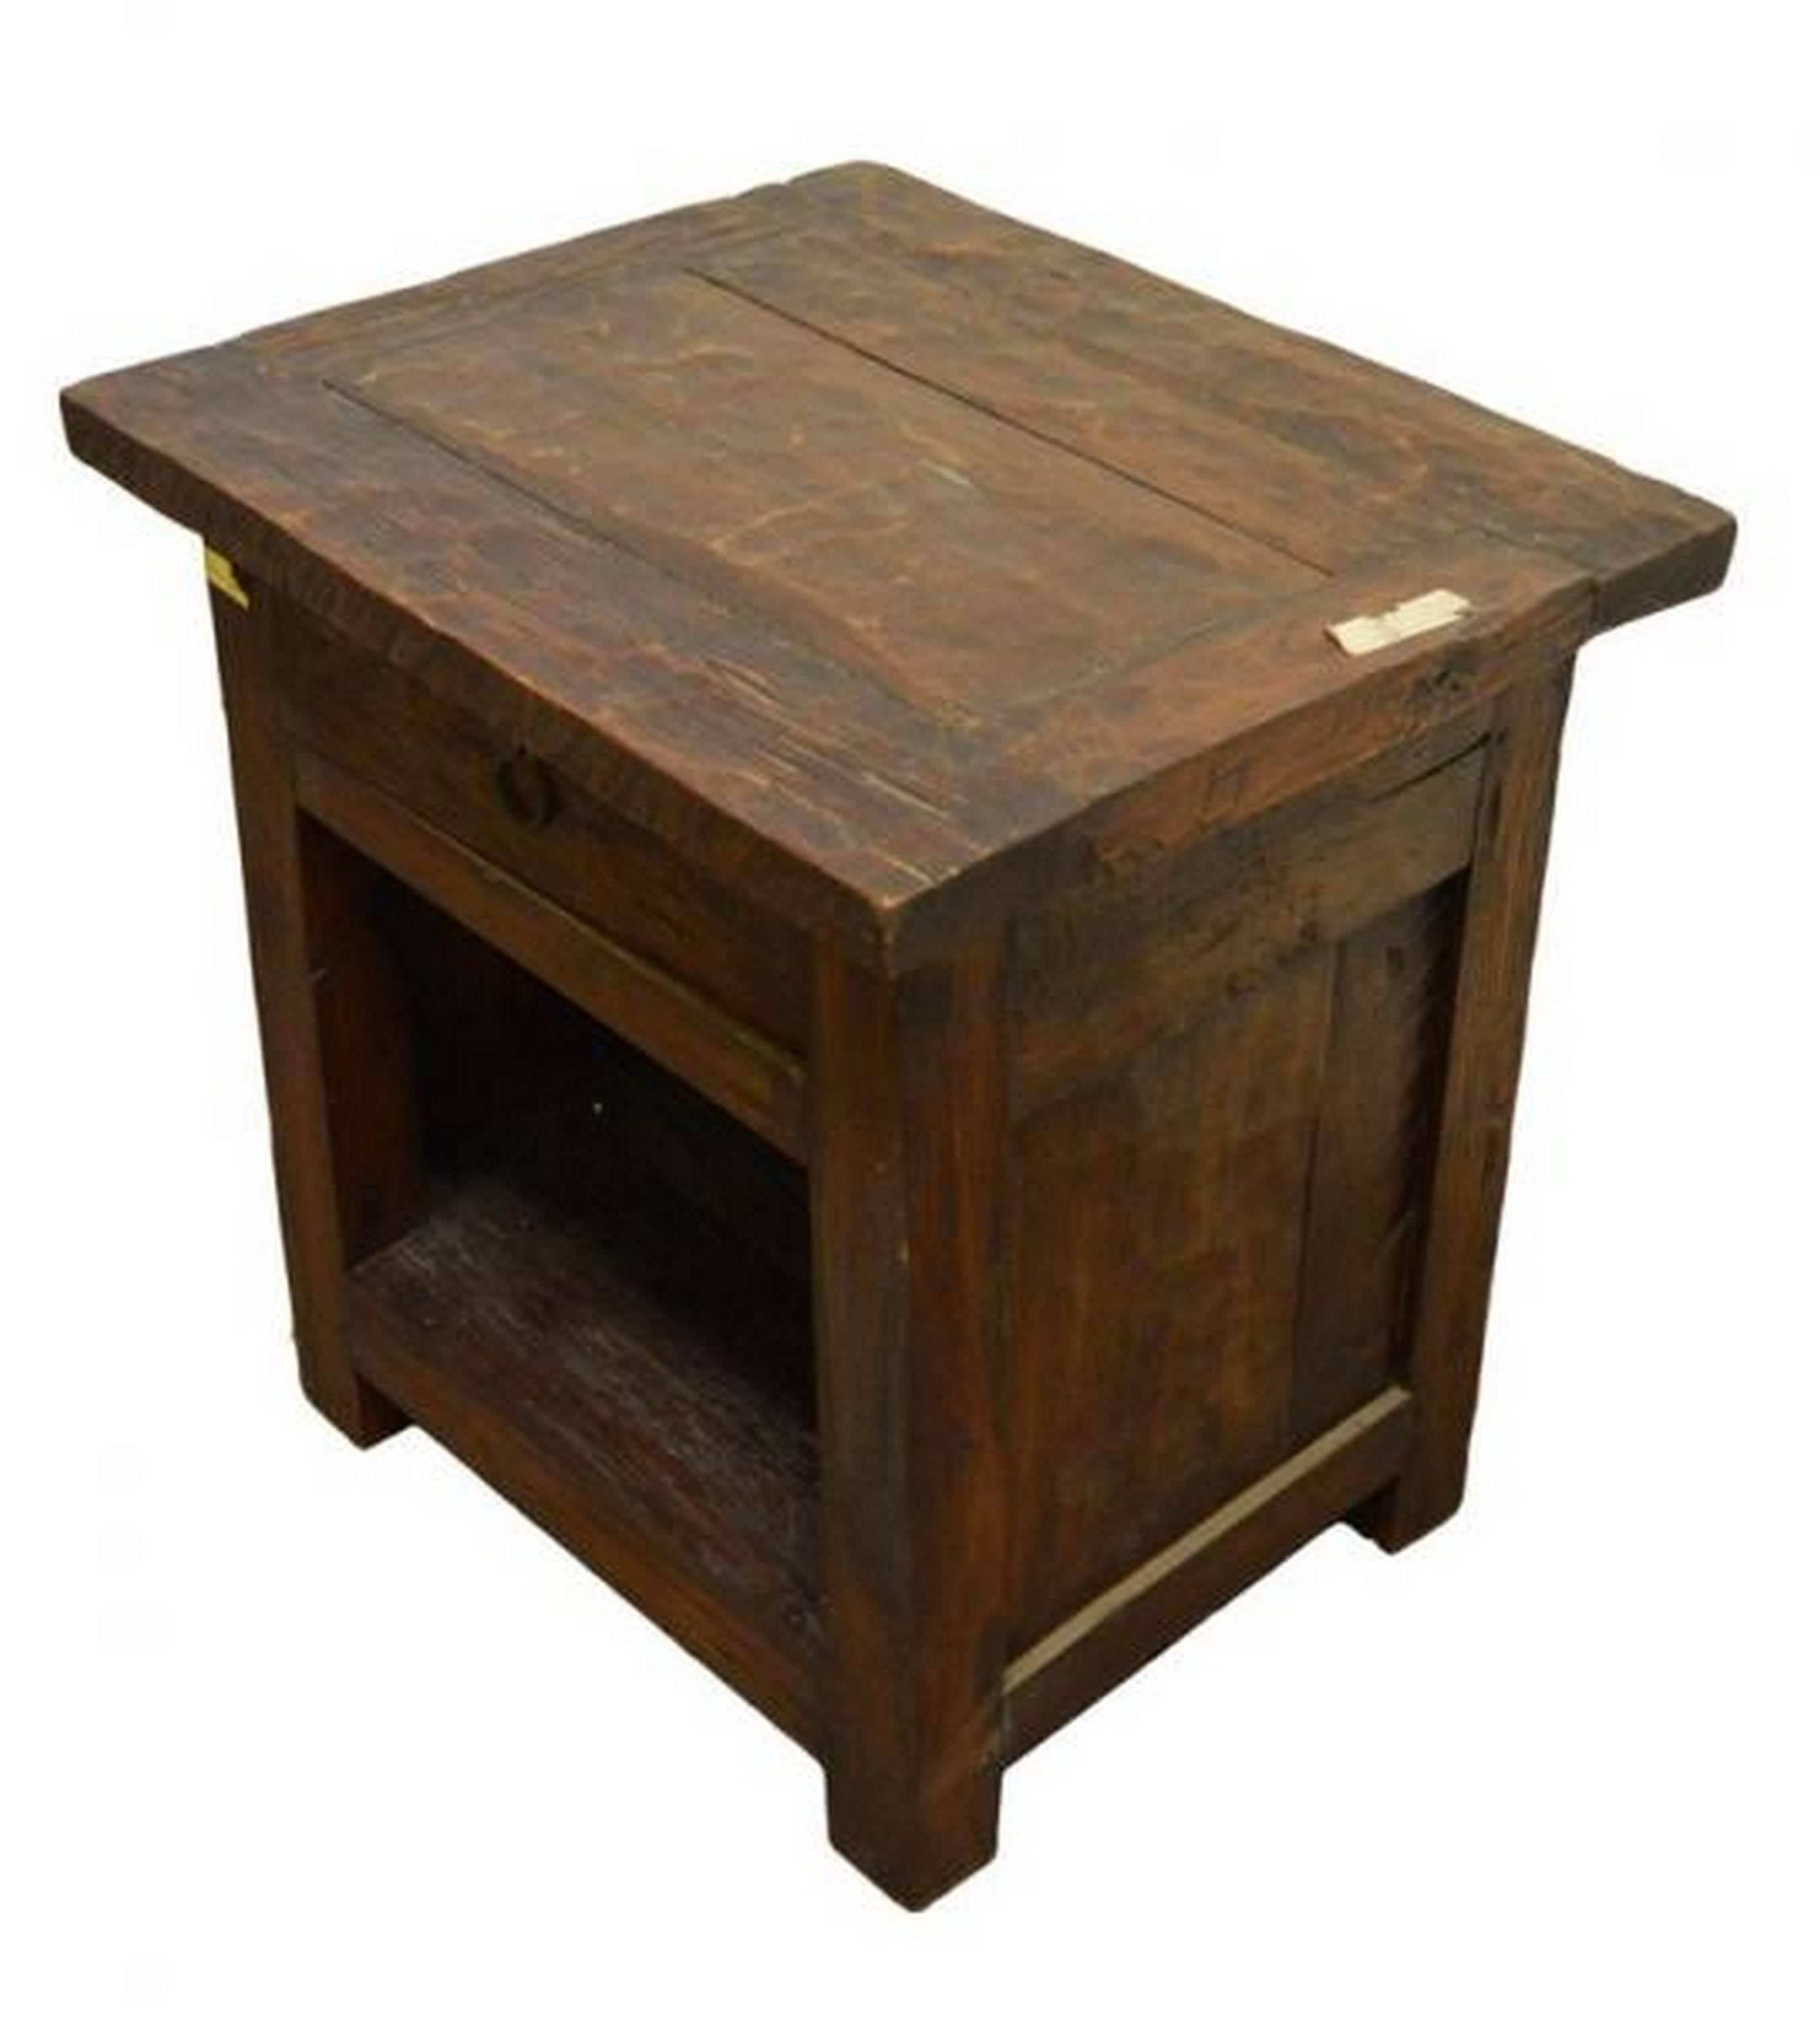 A 19th century rustic bedside table / cabinet with drawer and storage from Java, Indonesia. This small cabinet features a simple square top on a plank structure. The front displays a unique top drawer with a round pull handle and an open storage